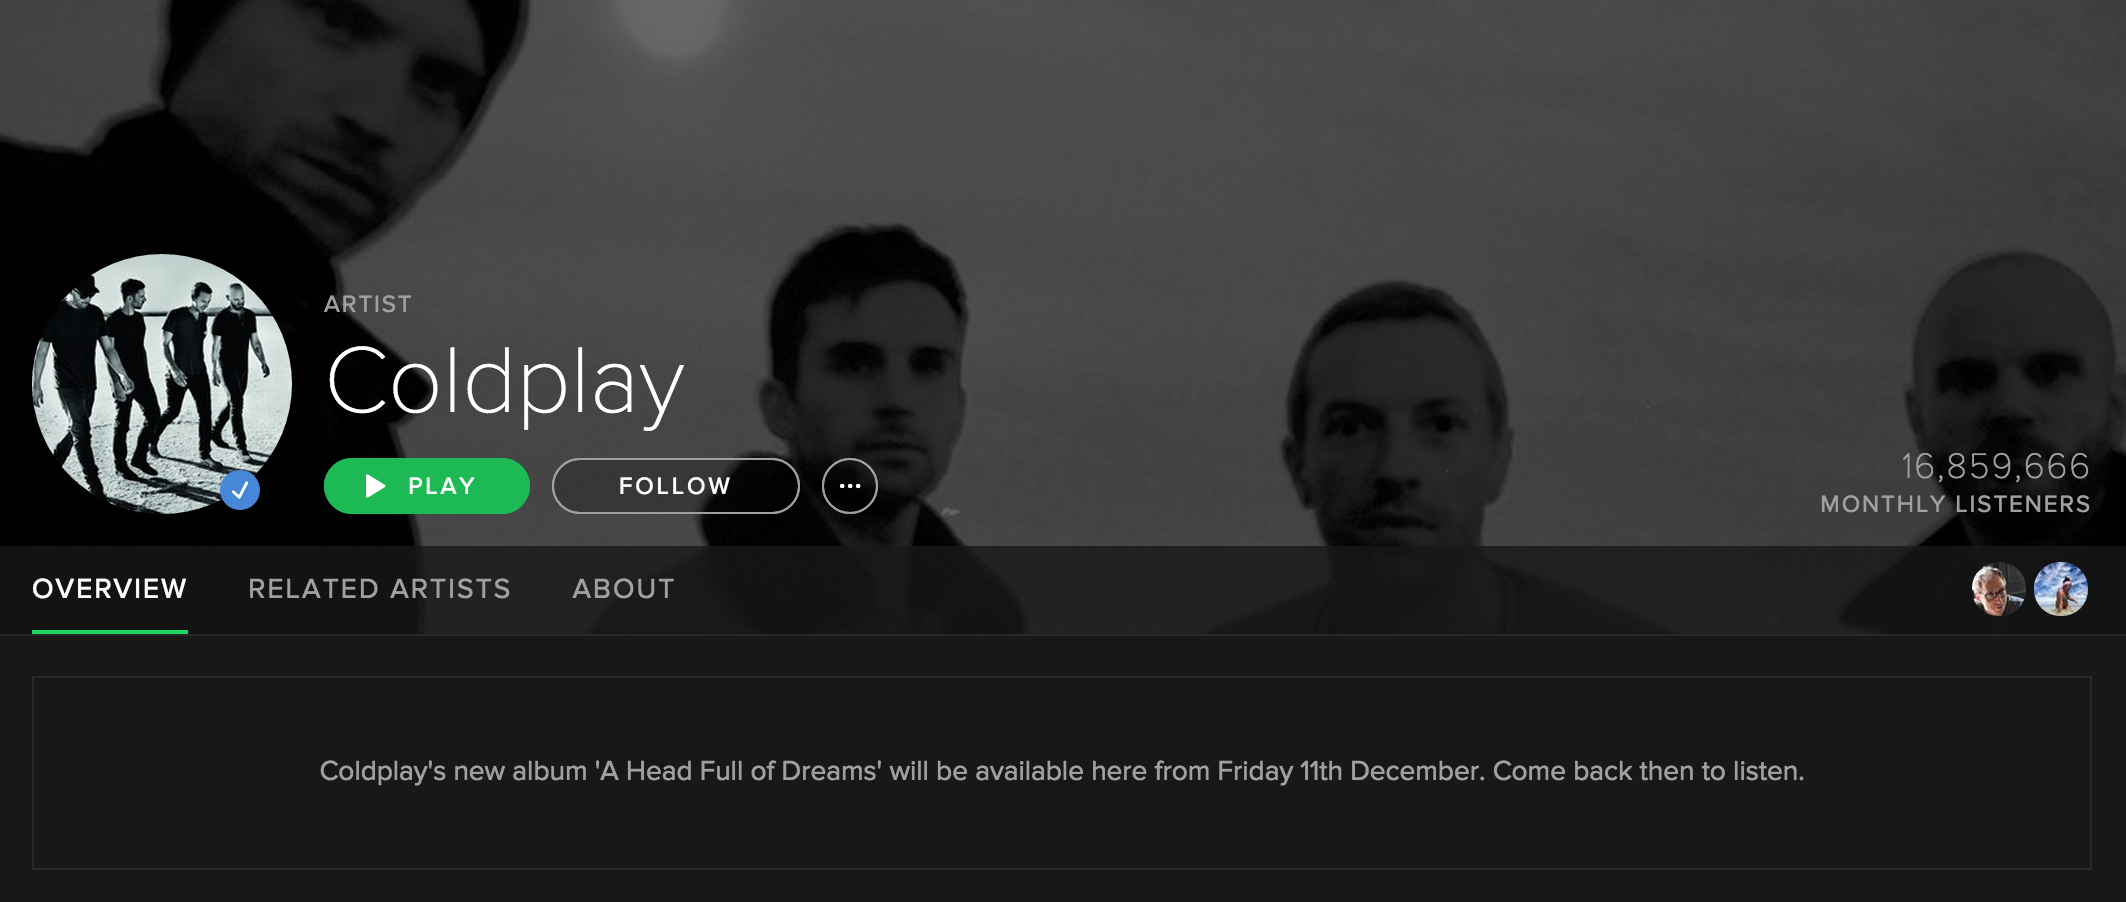 coldplay spotify coming soon